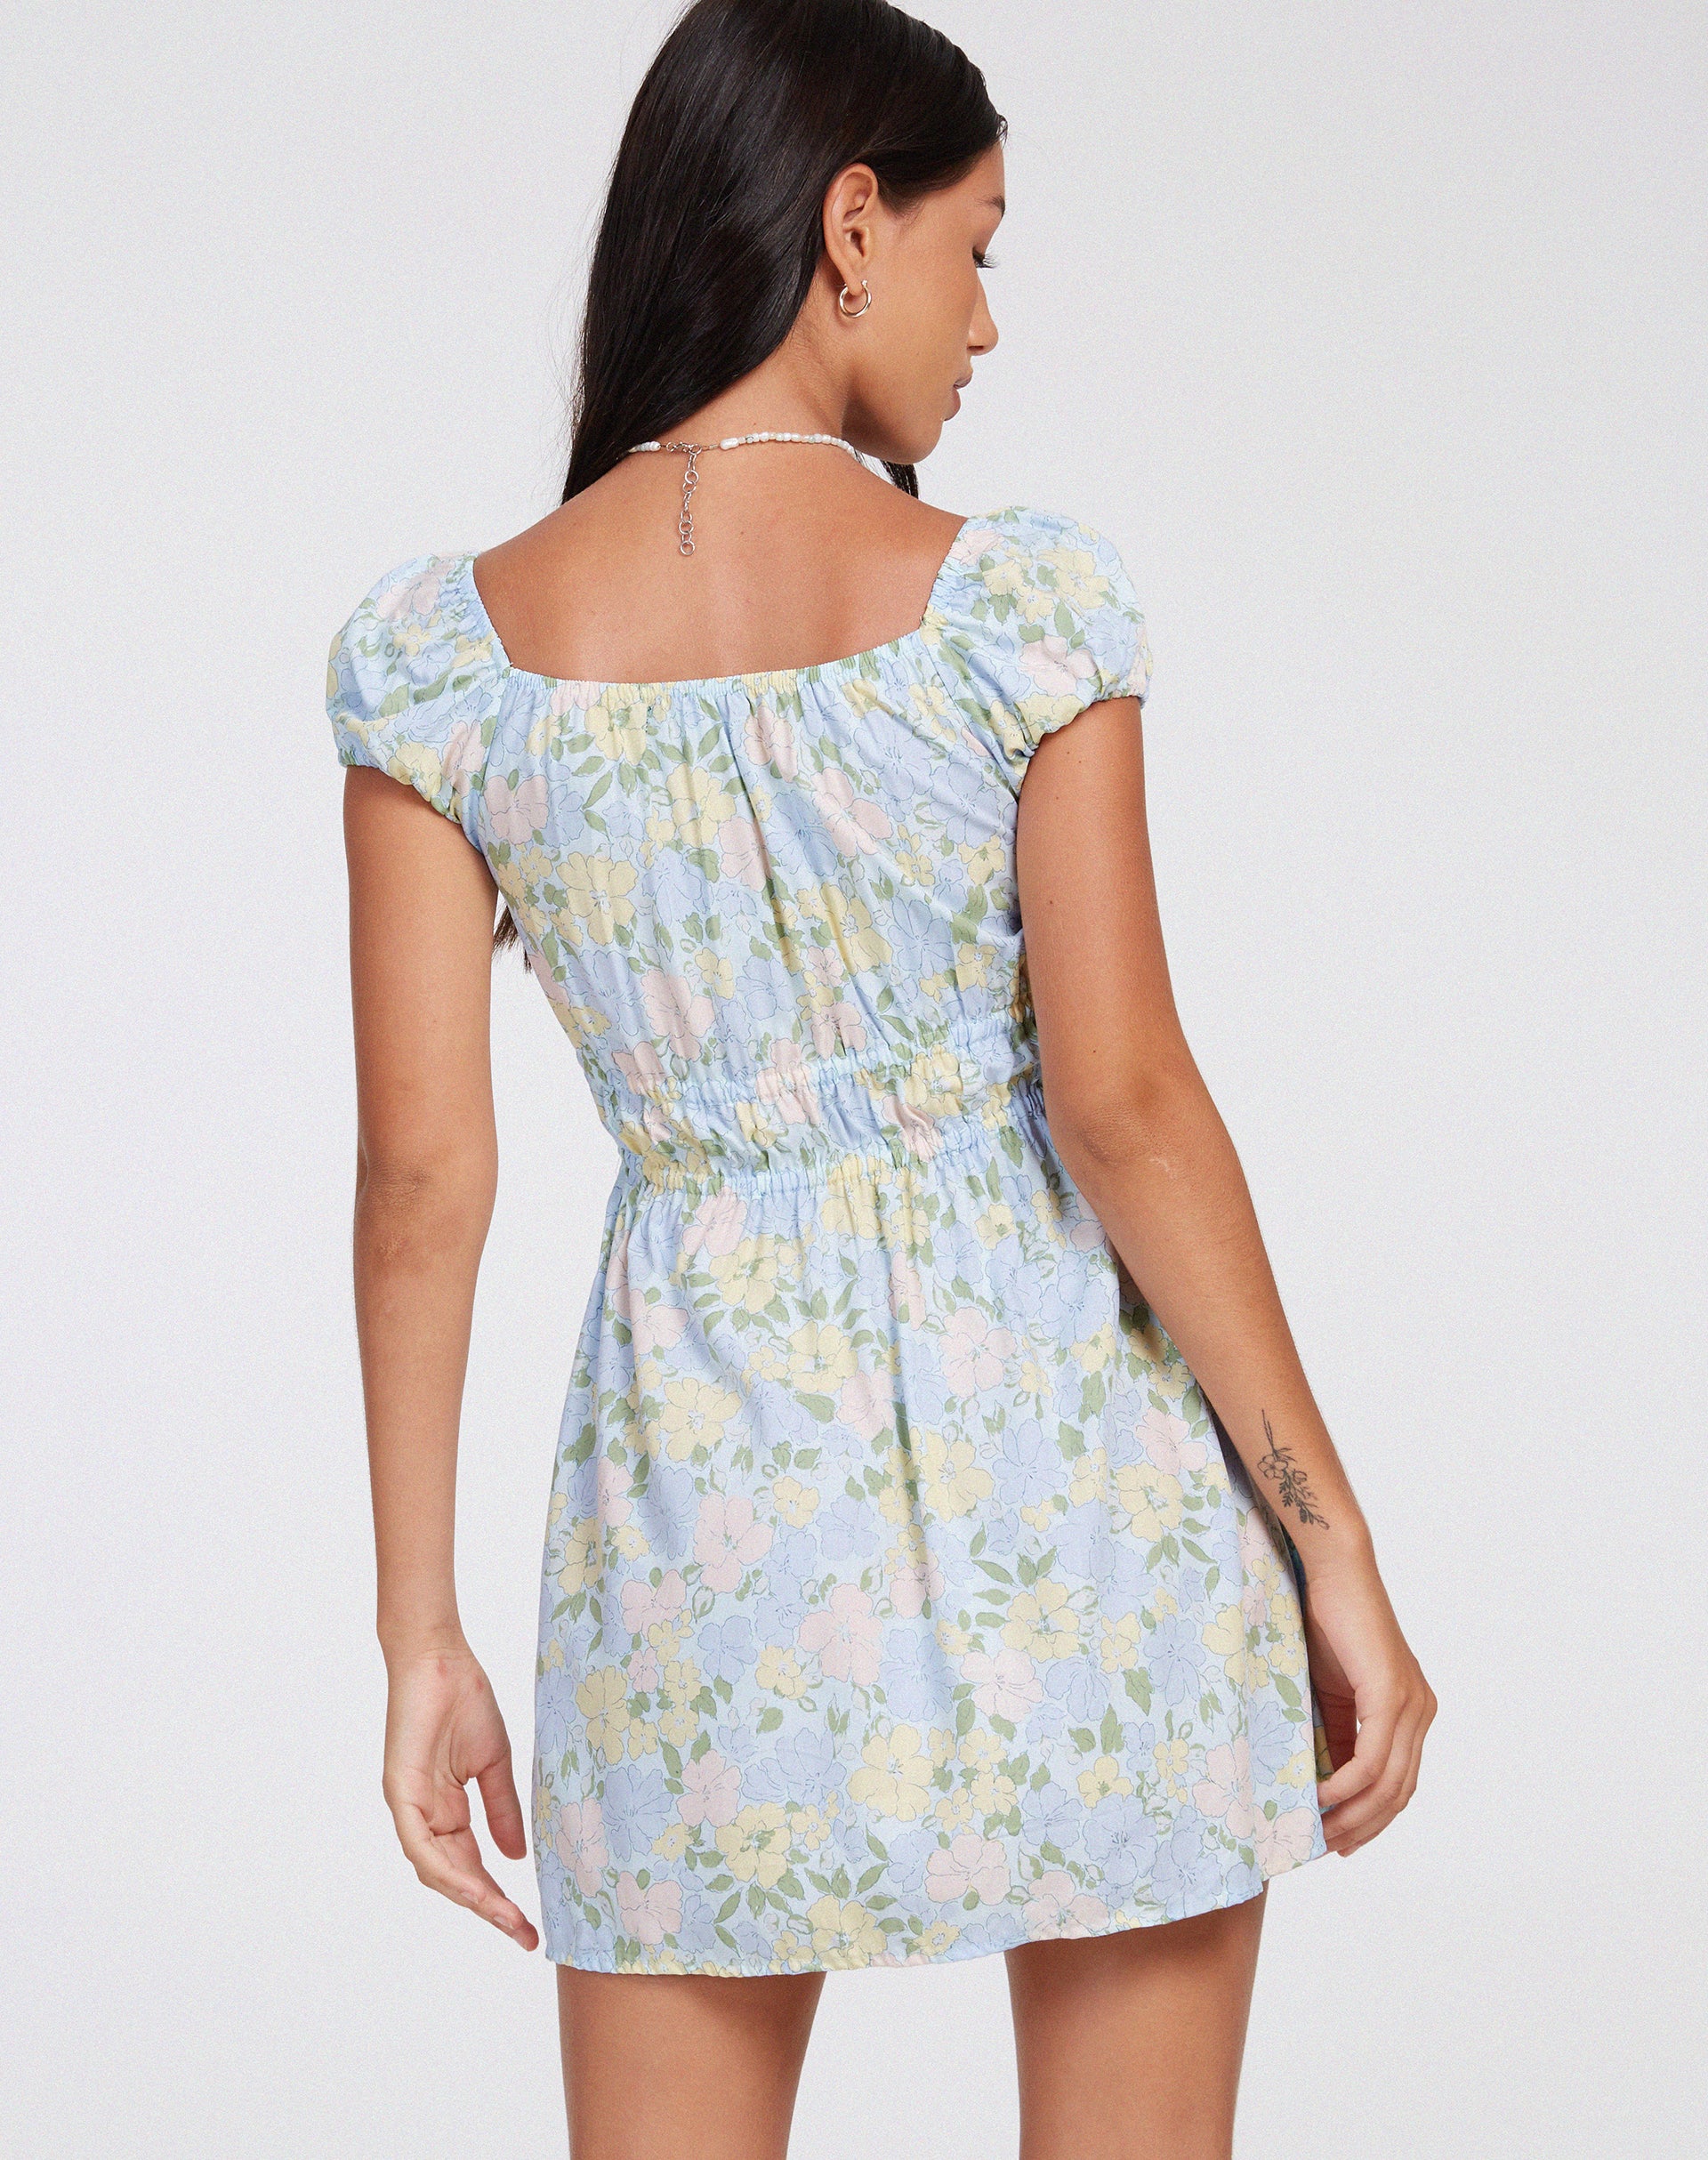 image of Galova Mini Dress in Washed Out Pastel Floral